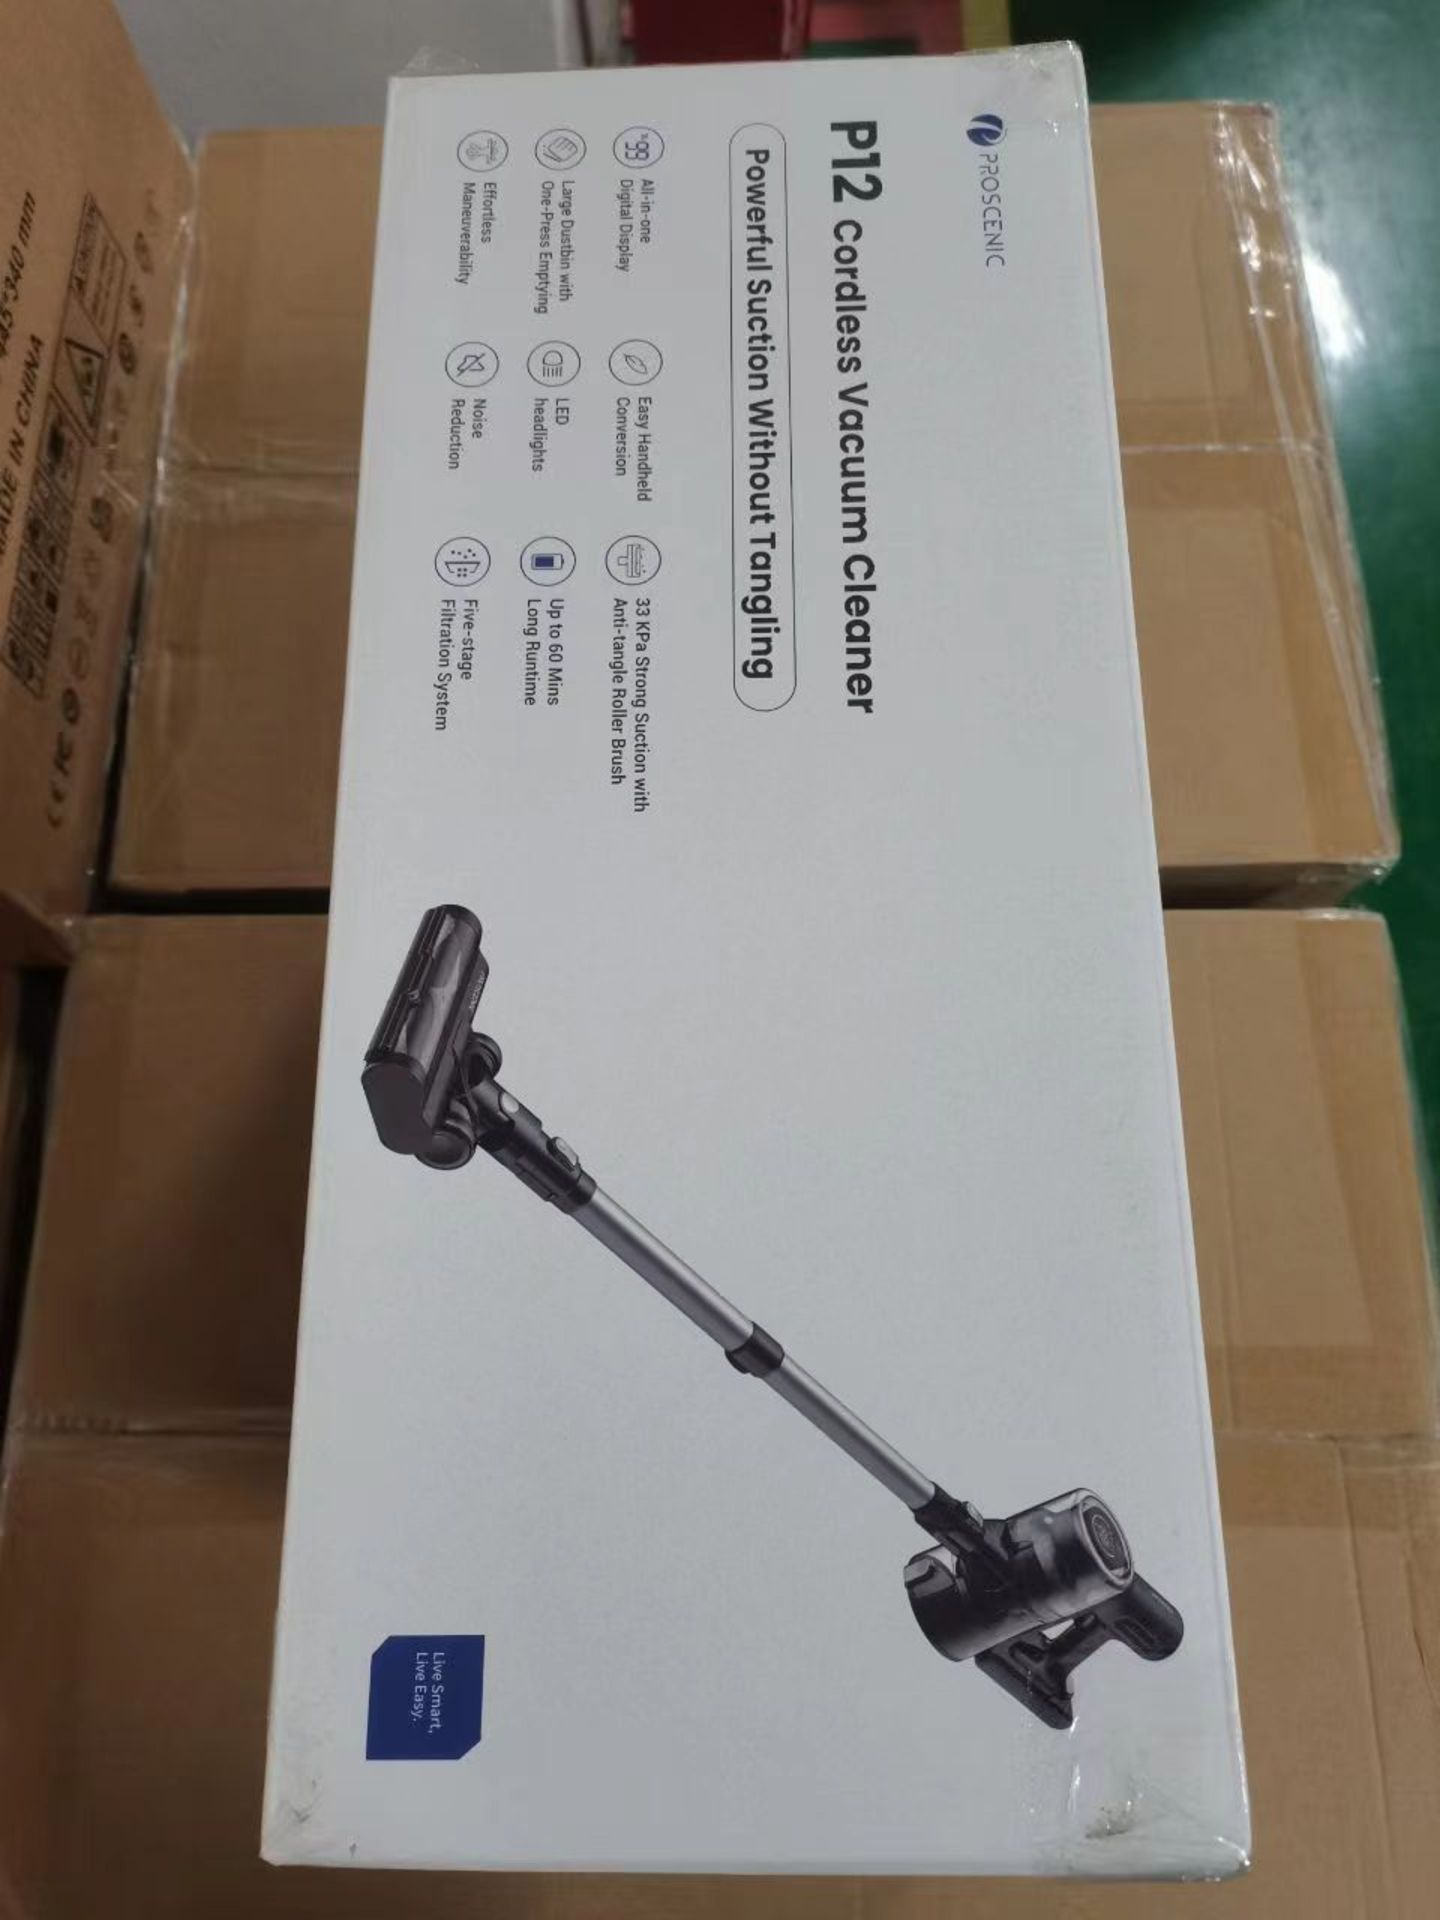 TRADE LOT 4 x New & Boxed Proscenic P12 Cordless Vacuum Cleaner, 33Kpa Stick Vacuum Cleaner with - Image 8 of 11